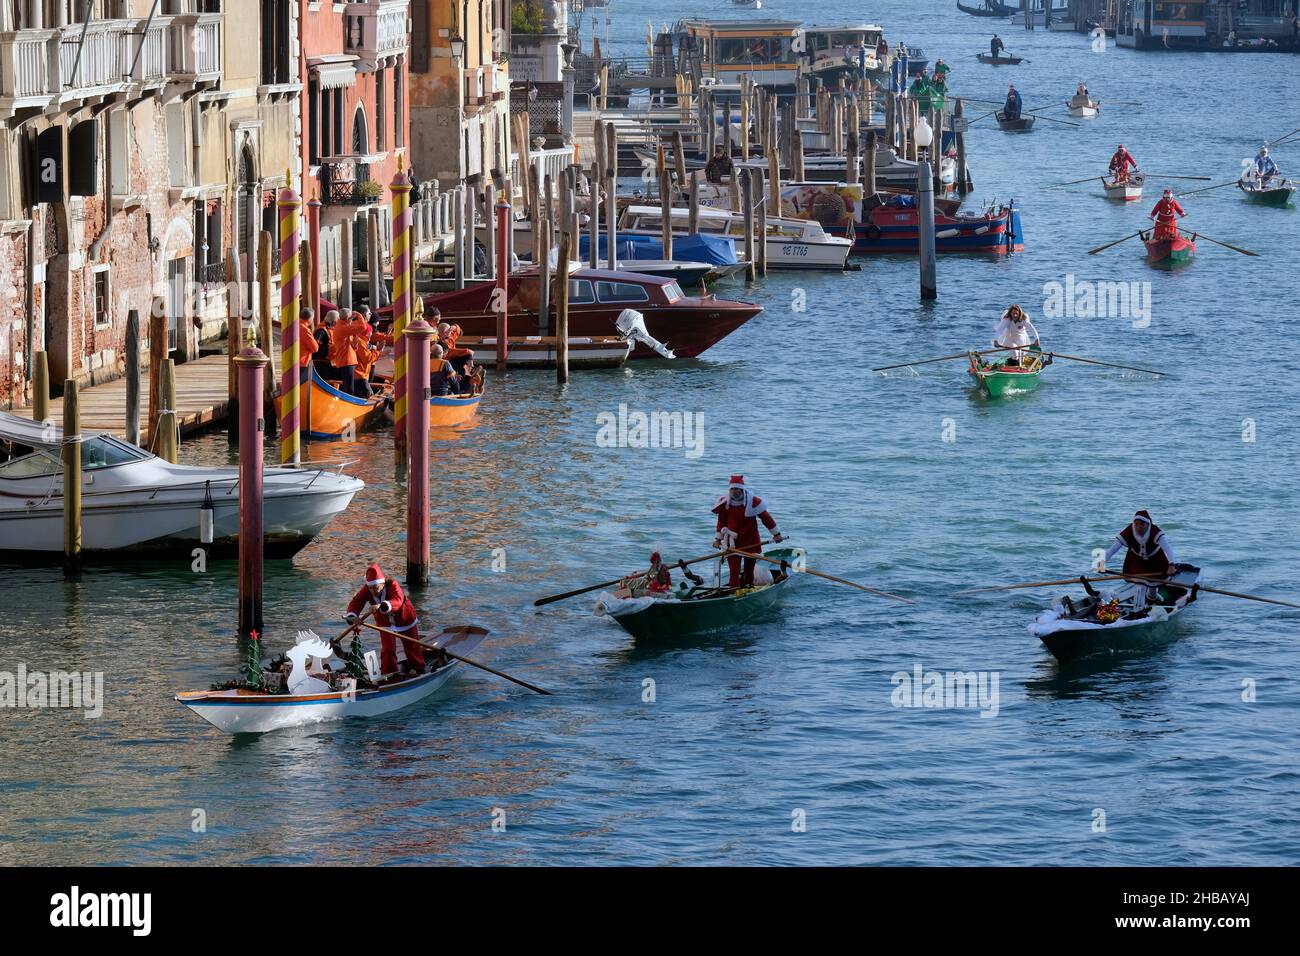 People dressed as Santa Claus row during a Christmas regatta in Venice, Italy December 17, 2017.(MvS) Stock Photo